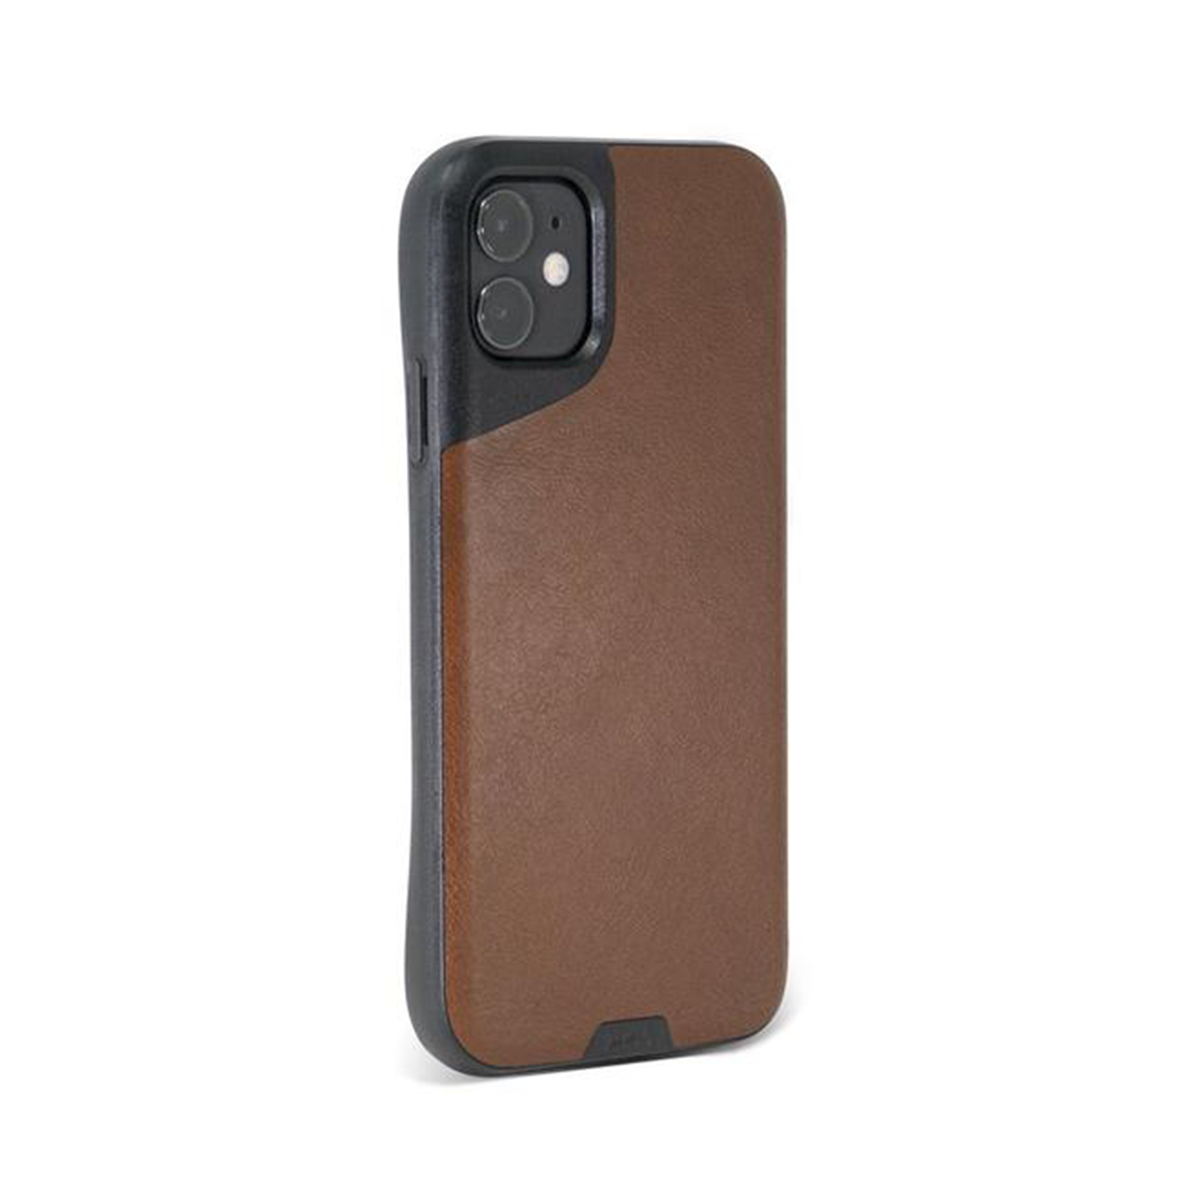 Mous - Contour Case for iPhone 11 - Brown Leather